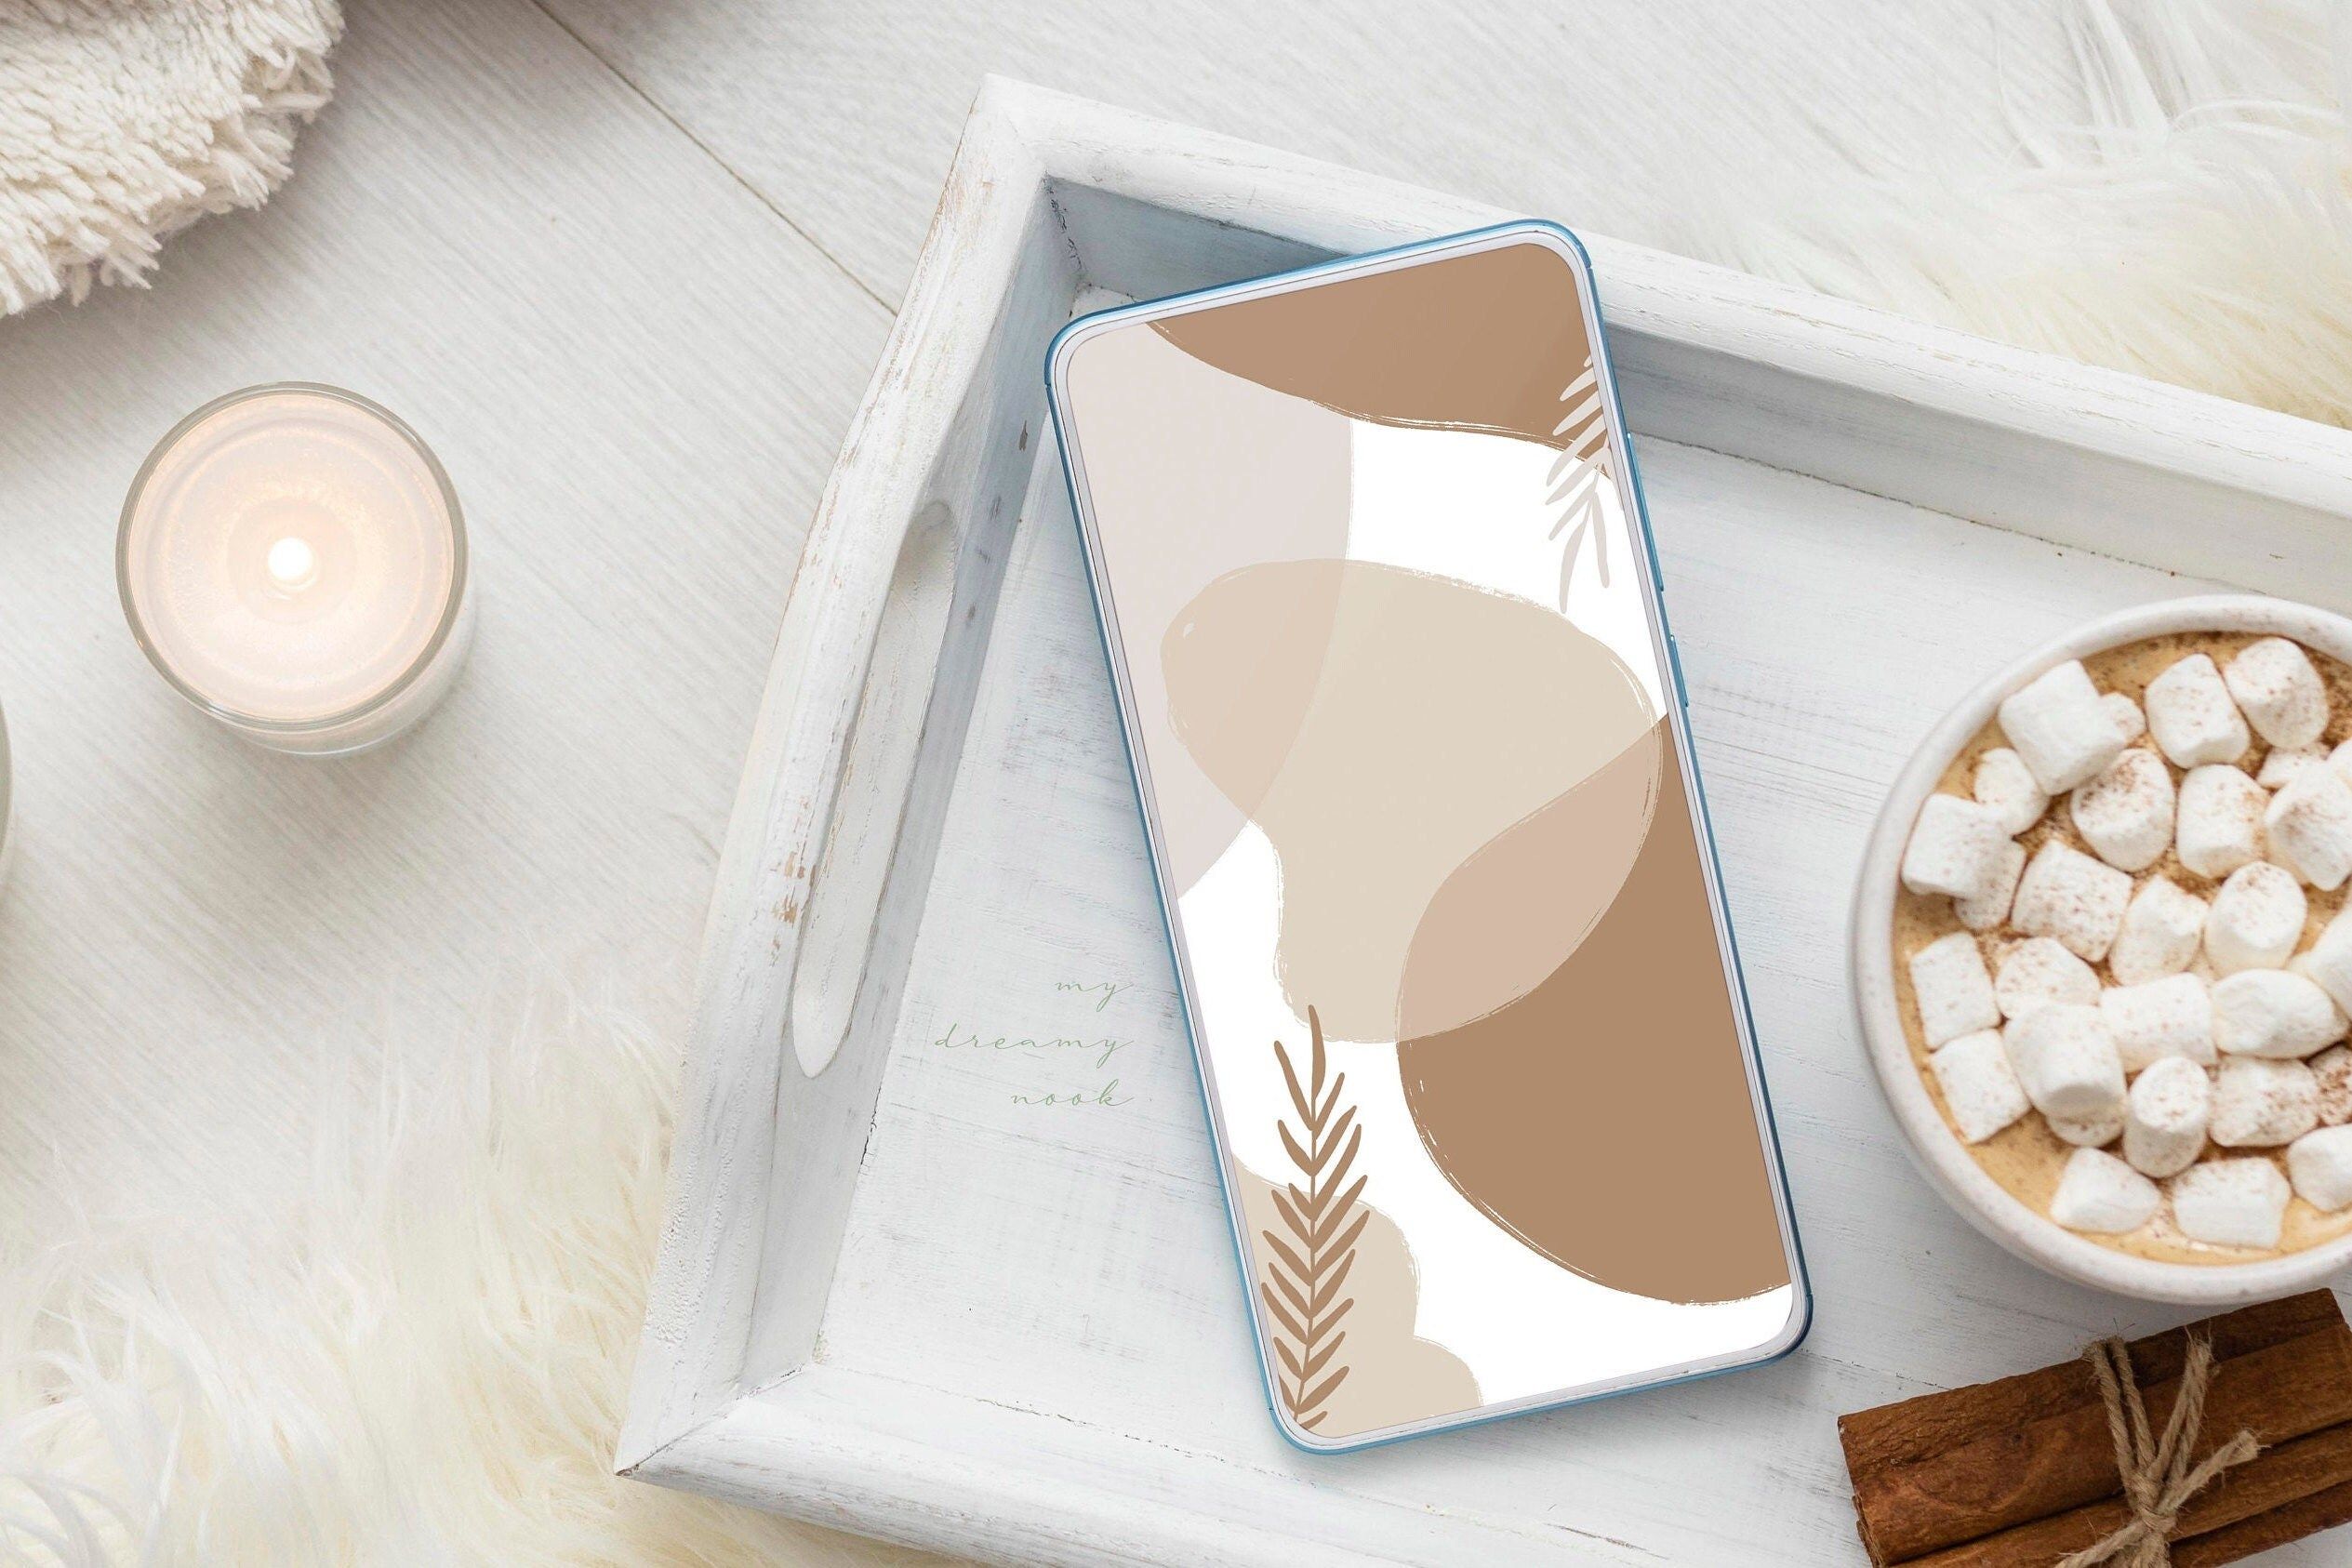 A phone with a digital wallpaper of a minimalist desert design on the screen. - Marshmallows